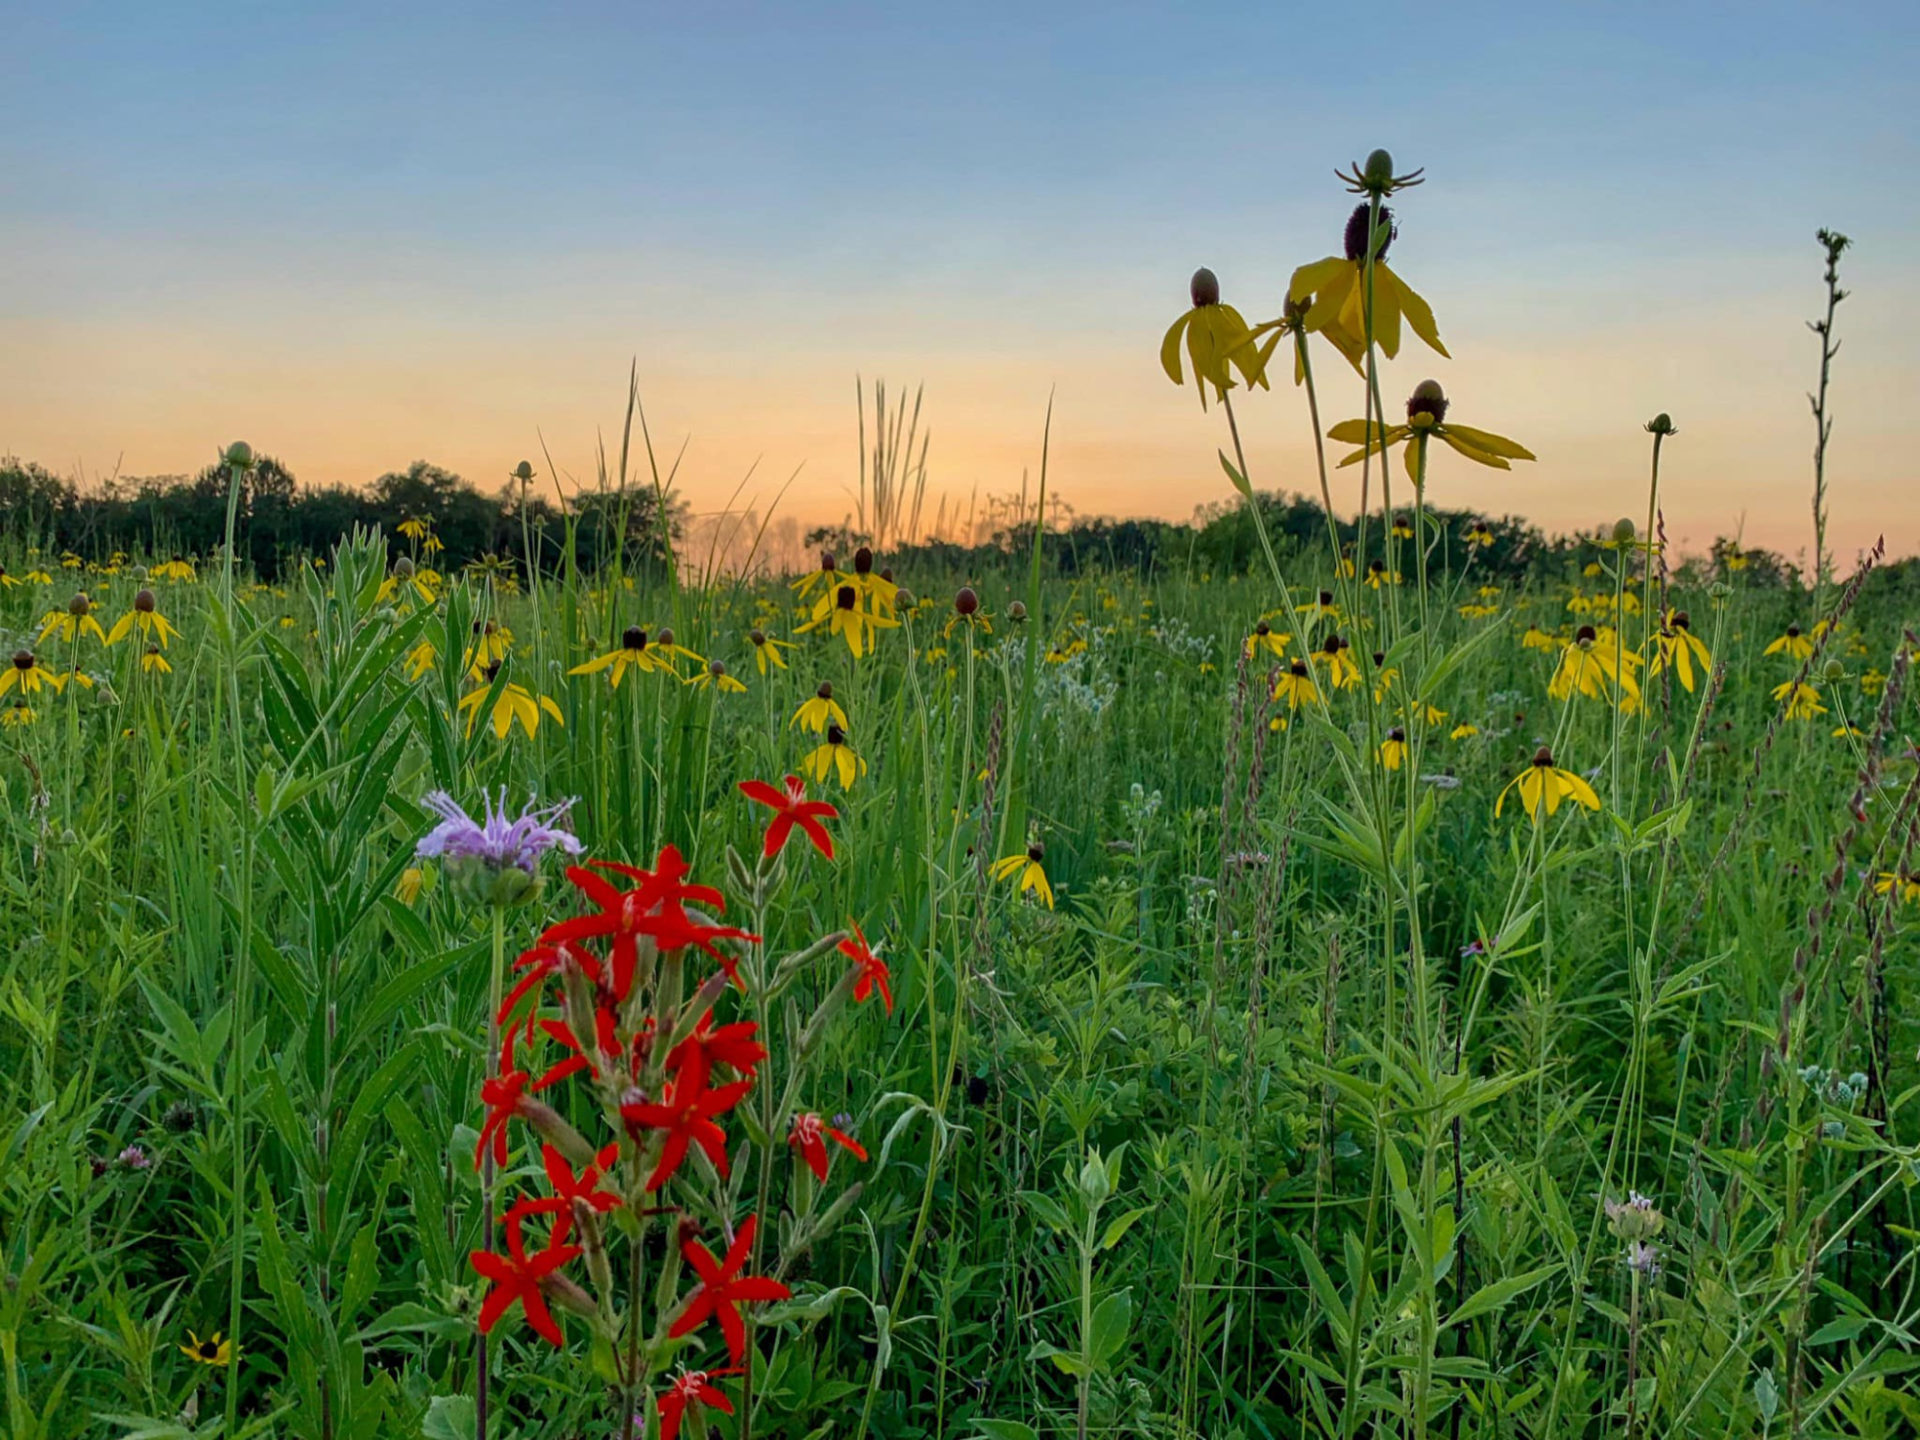 View of a prairie in the spring at sunset or sunrise. There are tall, vibrantly green grasses with black-eyed susan flowers with yellow petals. There are red flowers and a few lavender colored flowers, too.